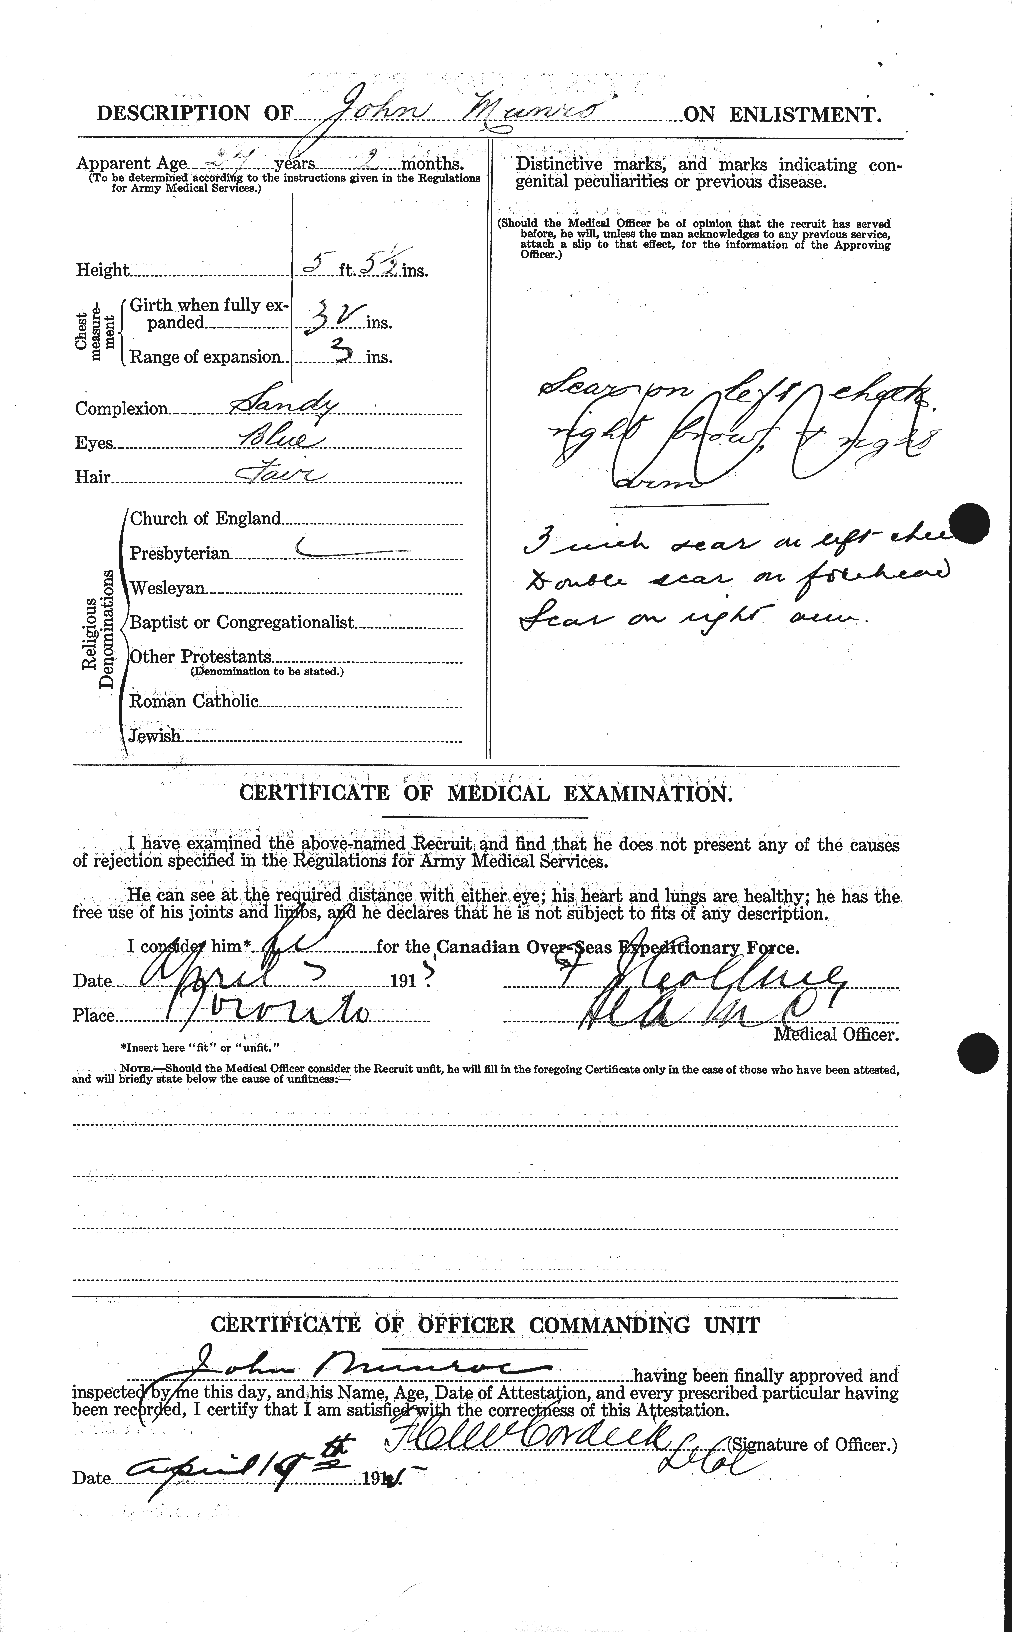 Personnel Records of the First World War - CEF 513947b